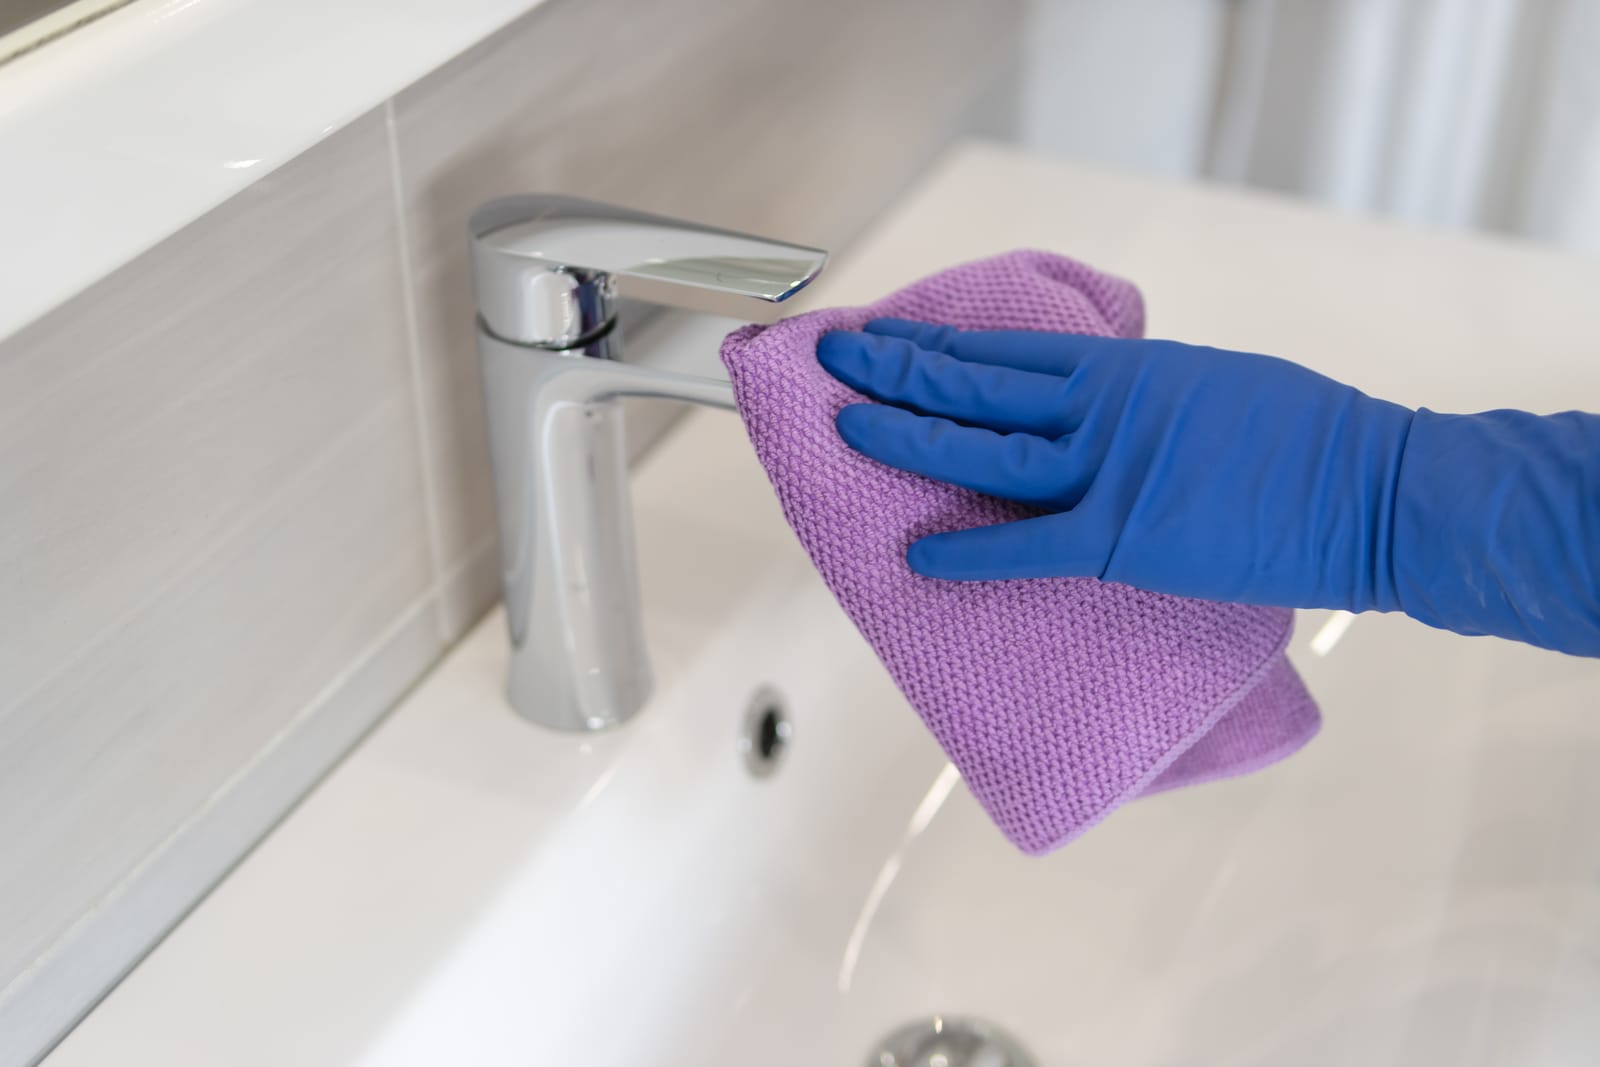 How to Clean the bathroom